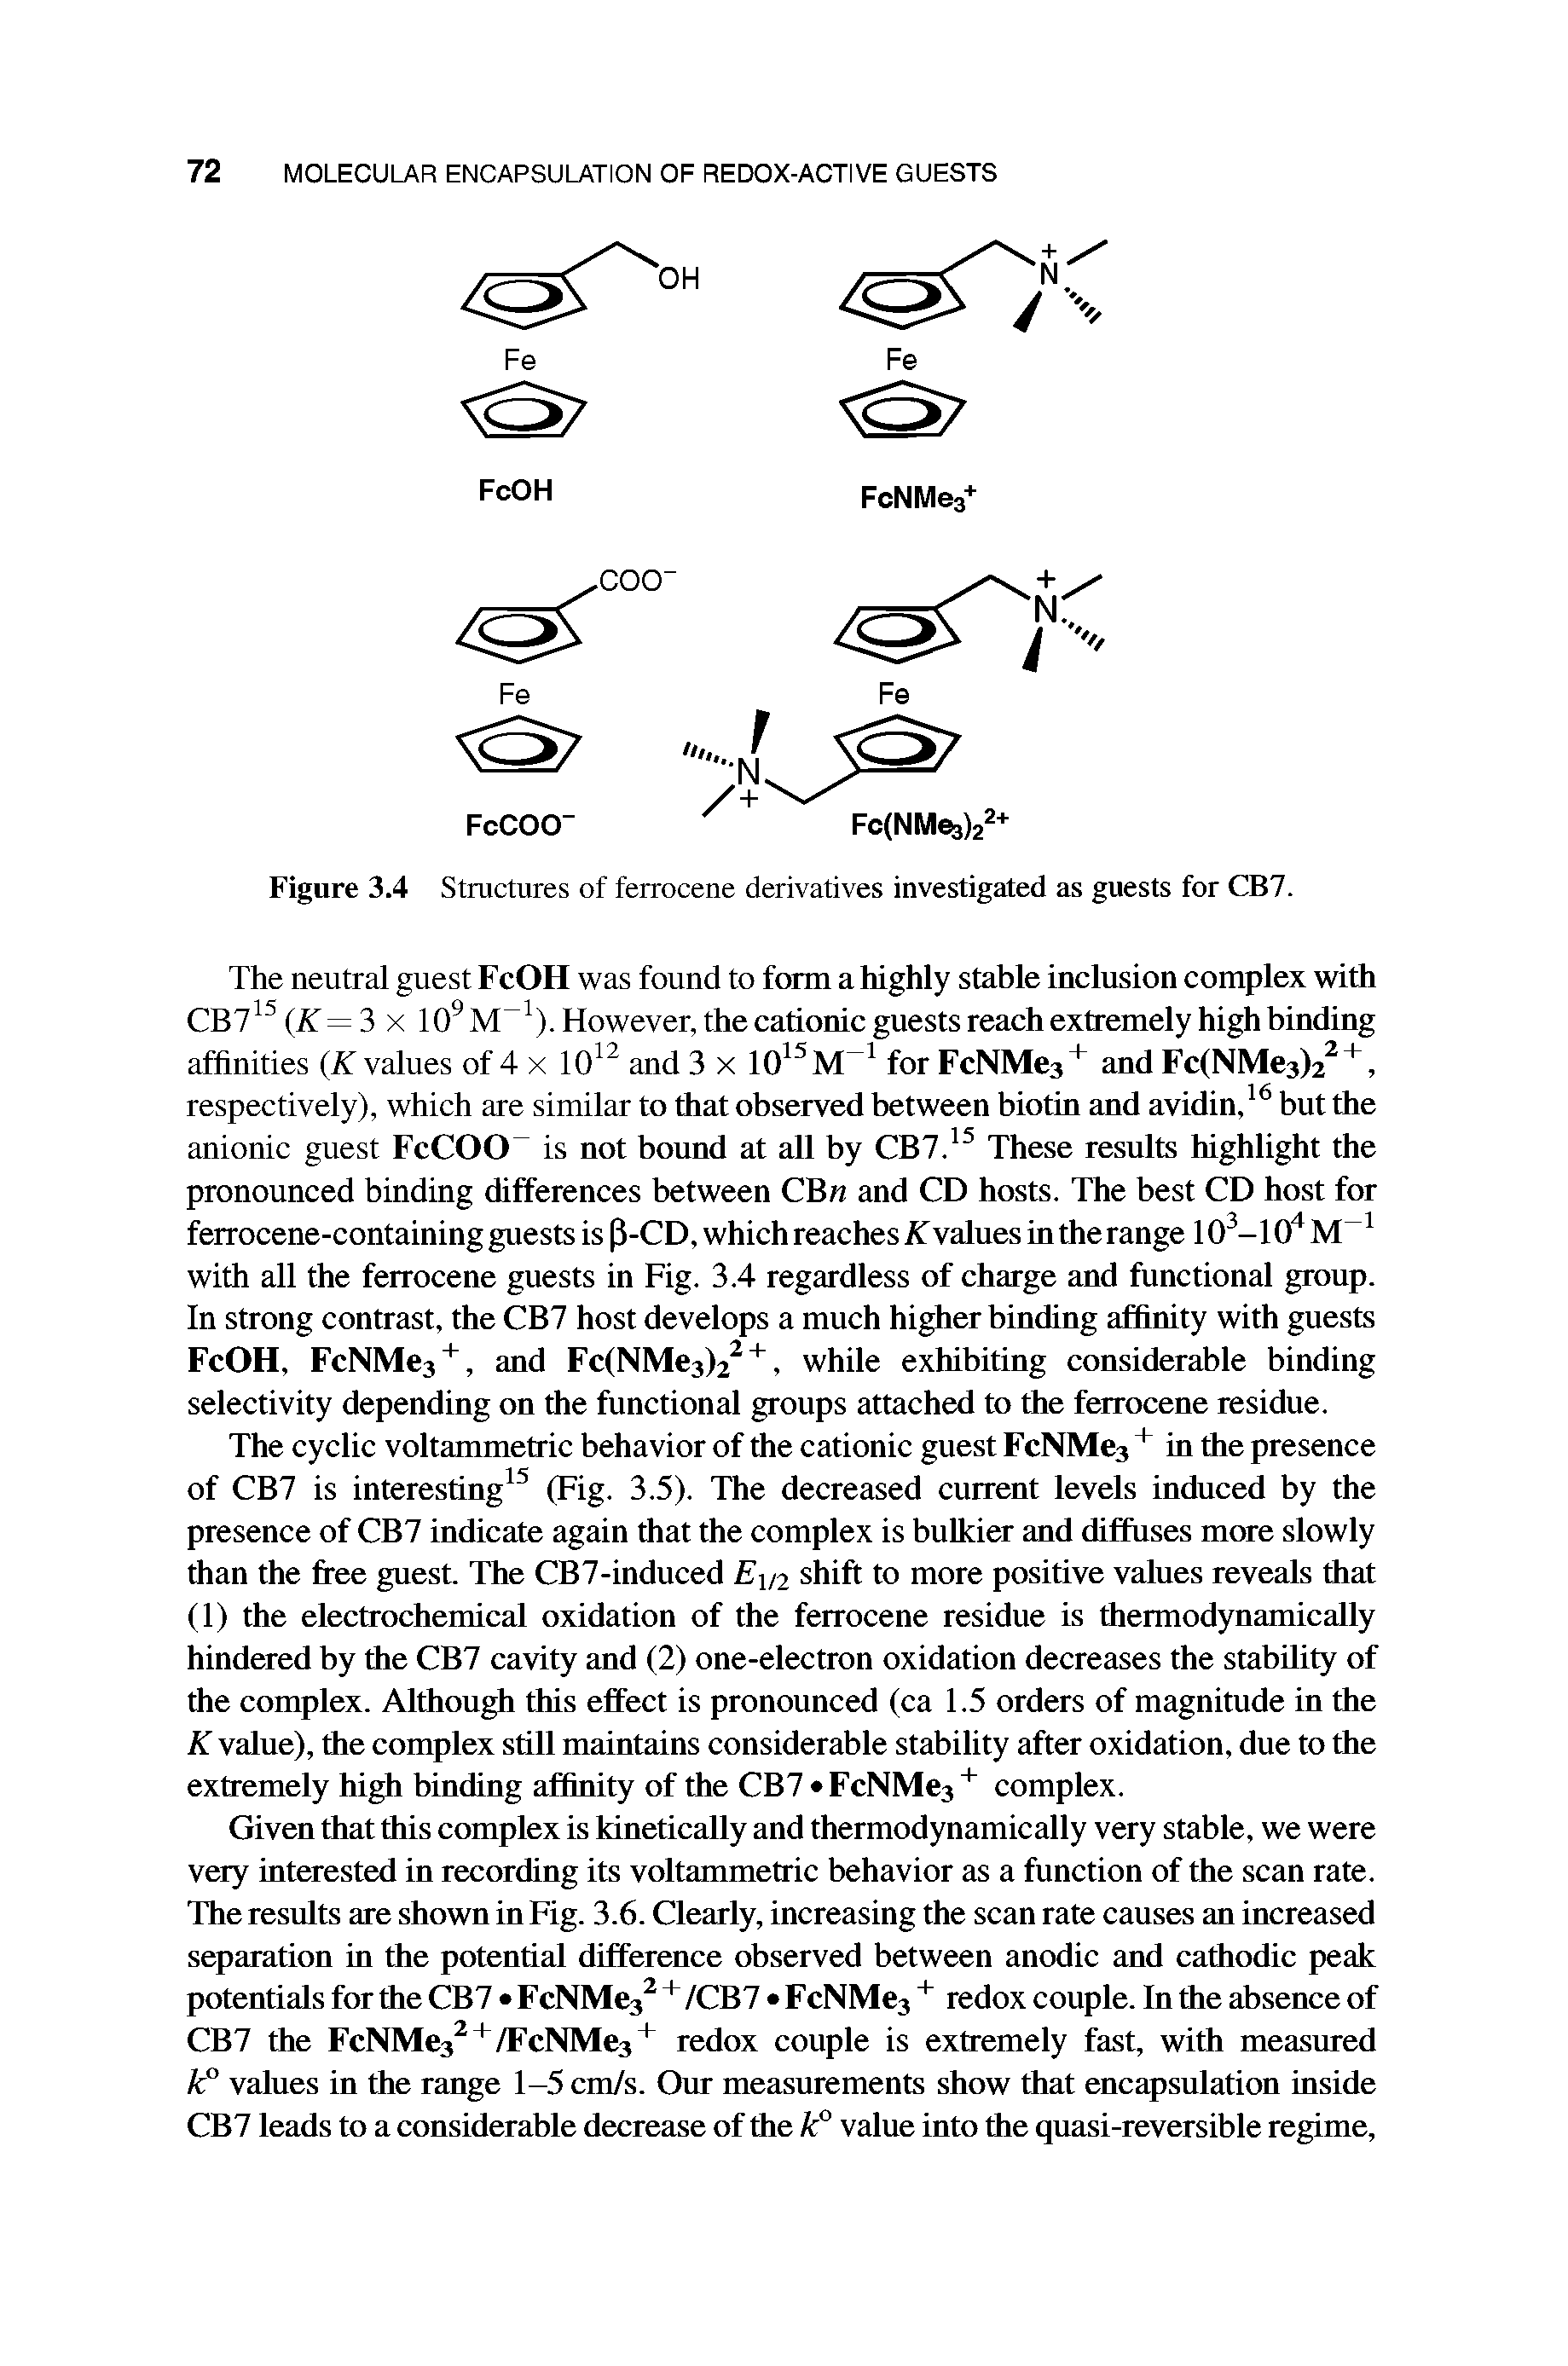 Figure 3.4 Structures of ferrocene derivatives investigated as guests for CB7.